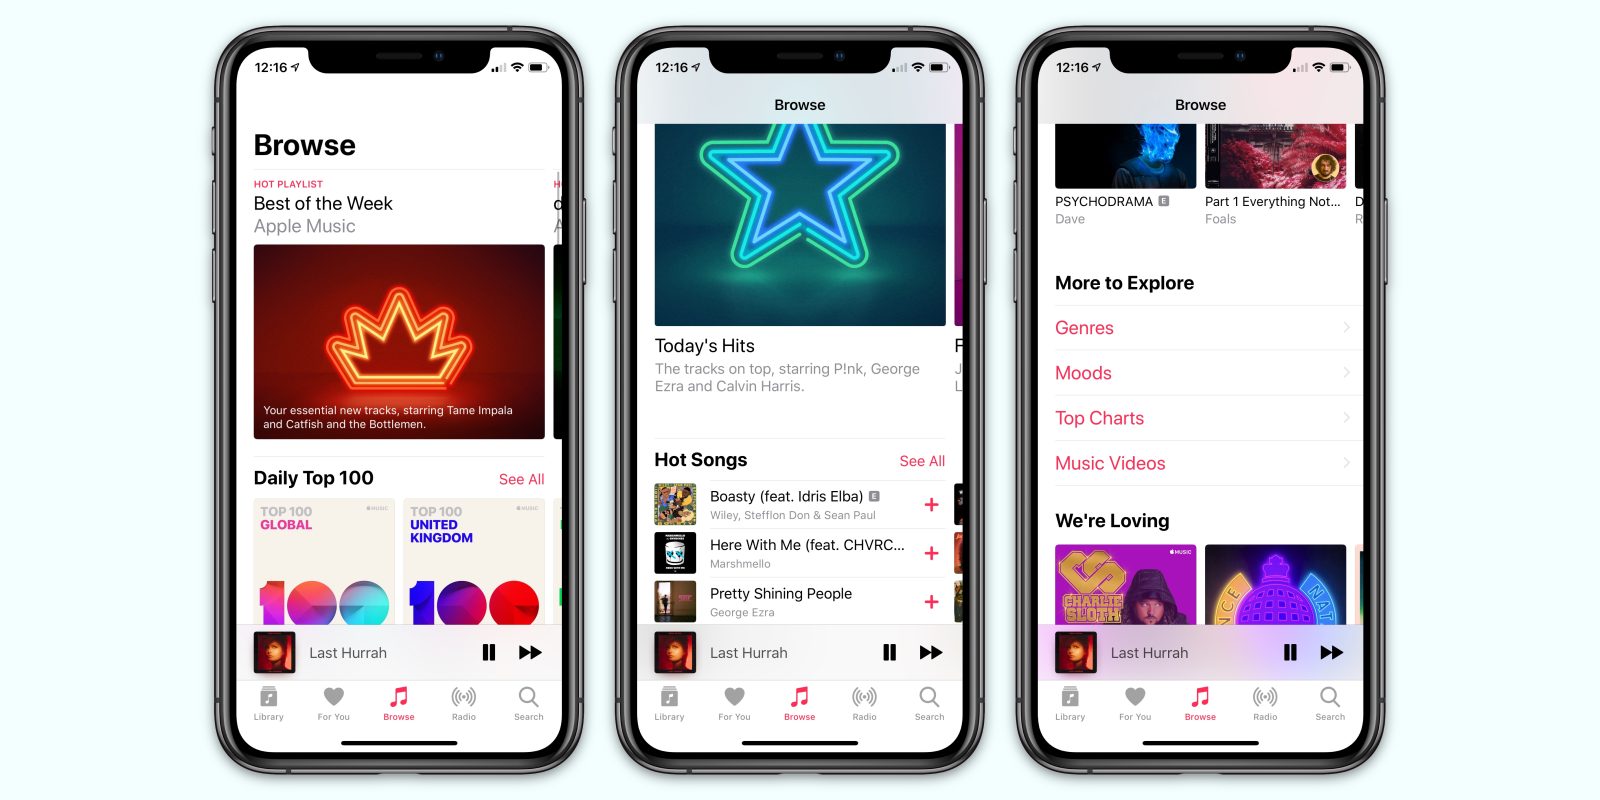 Apple Music Browse Tab Reorganized To Help Users Find Music And